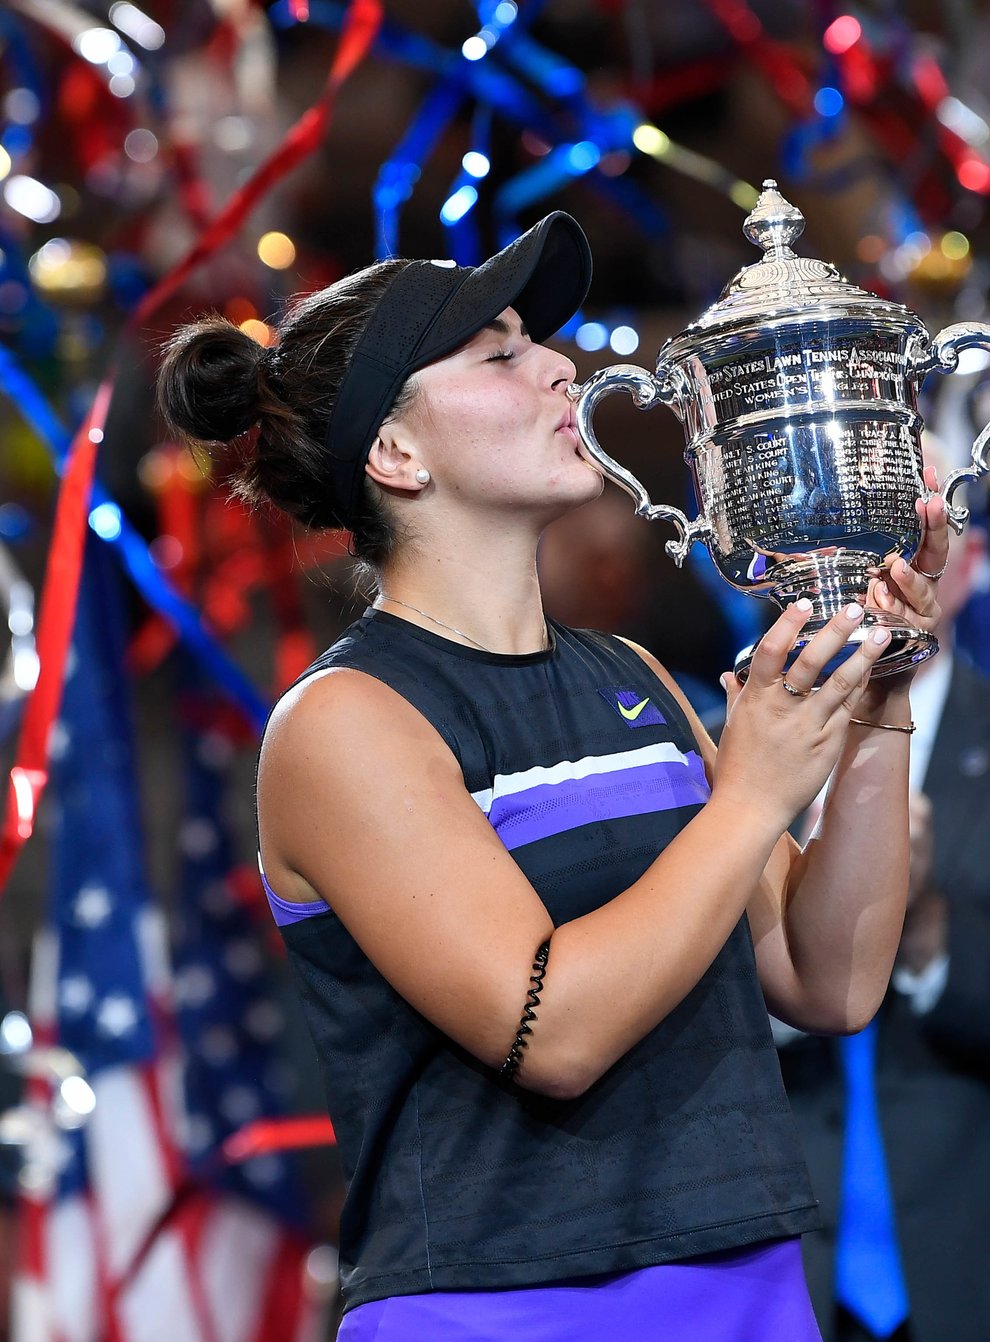 Bianca Andreescu became the first teenager since 2006 to win the US Open (PA Images)